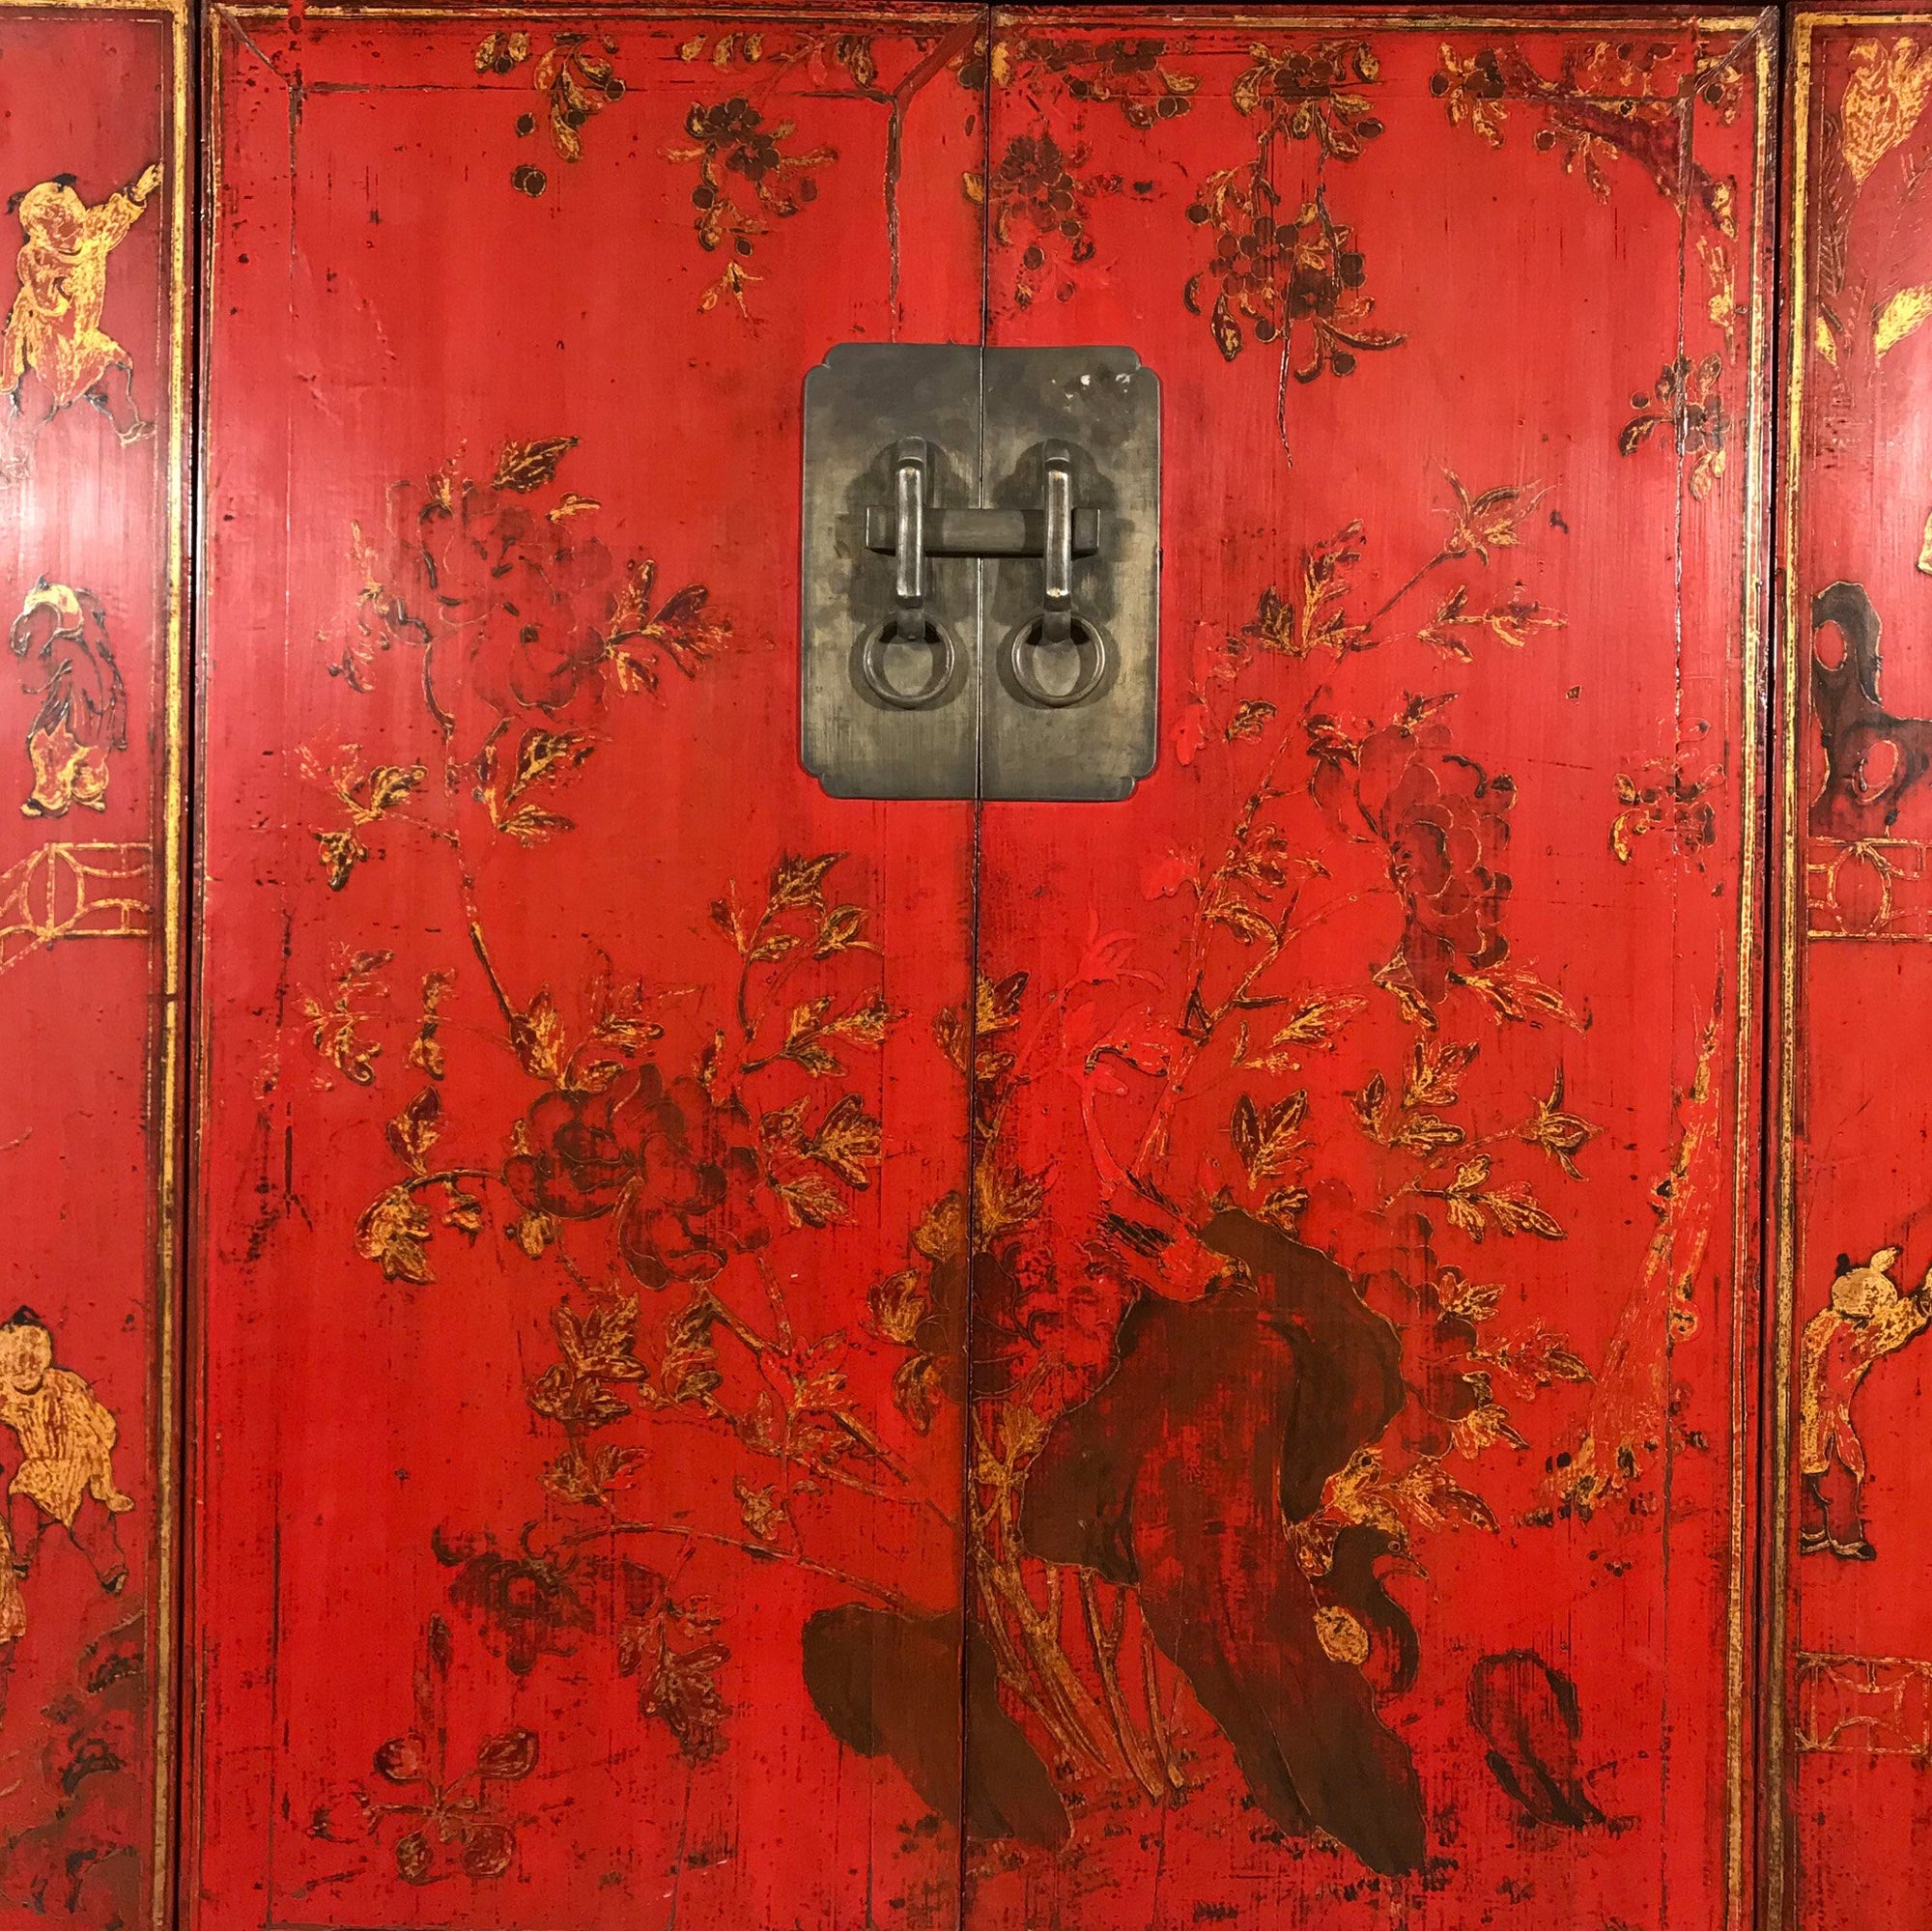 Red Lacquer Wedding Cabinet From Shanxi Province - 19thC - 136 x 53 x 176 (wxdxh cms) - C1394